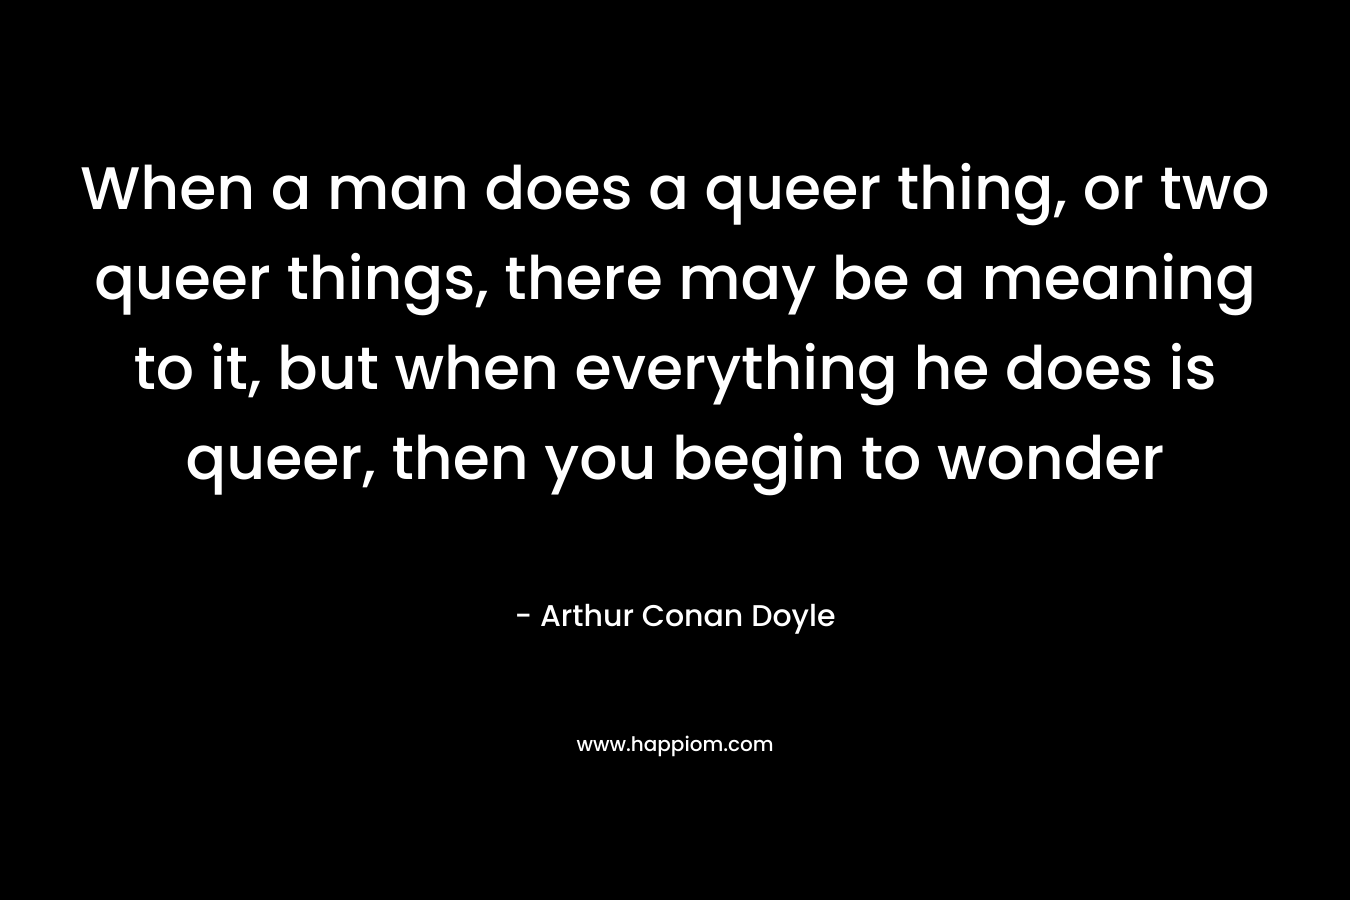 When a man does a queer thing, or two queer things, there may be a meaning to it, but when everything he does is queer, then you begin to wonder